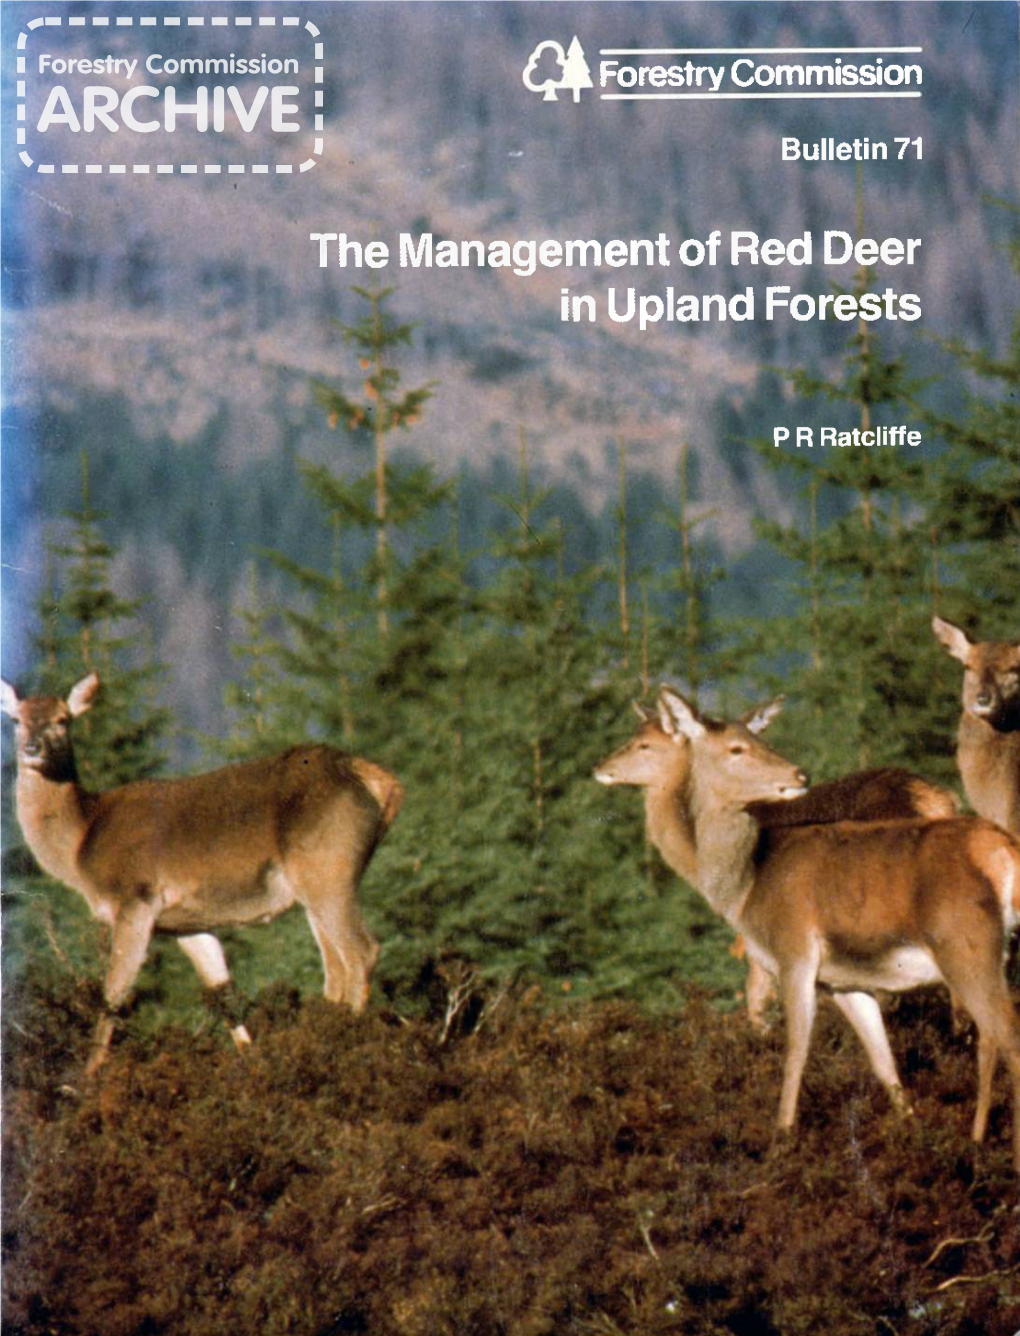 The Management of Red Deer in Upland Forests